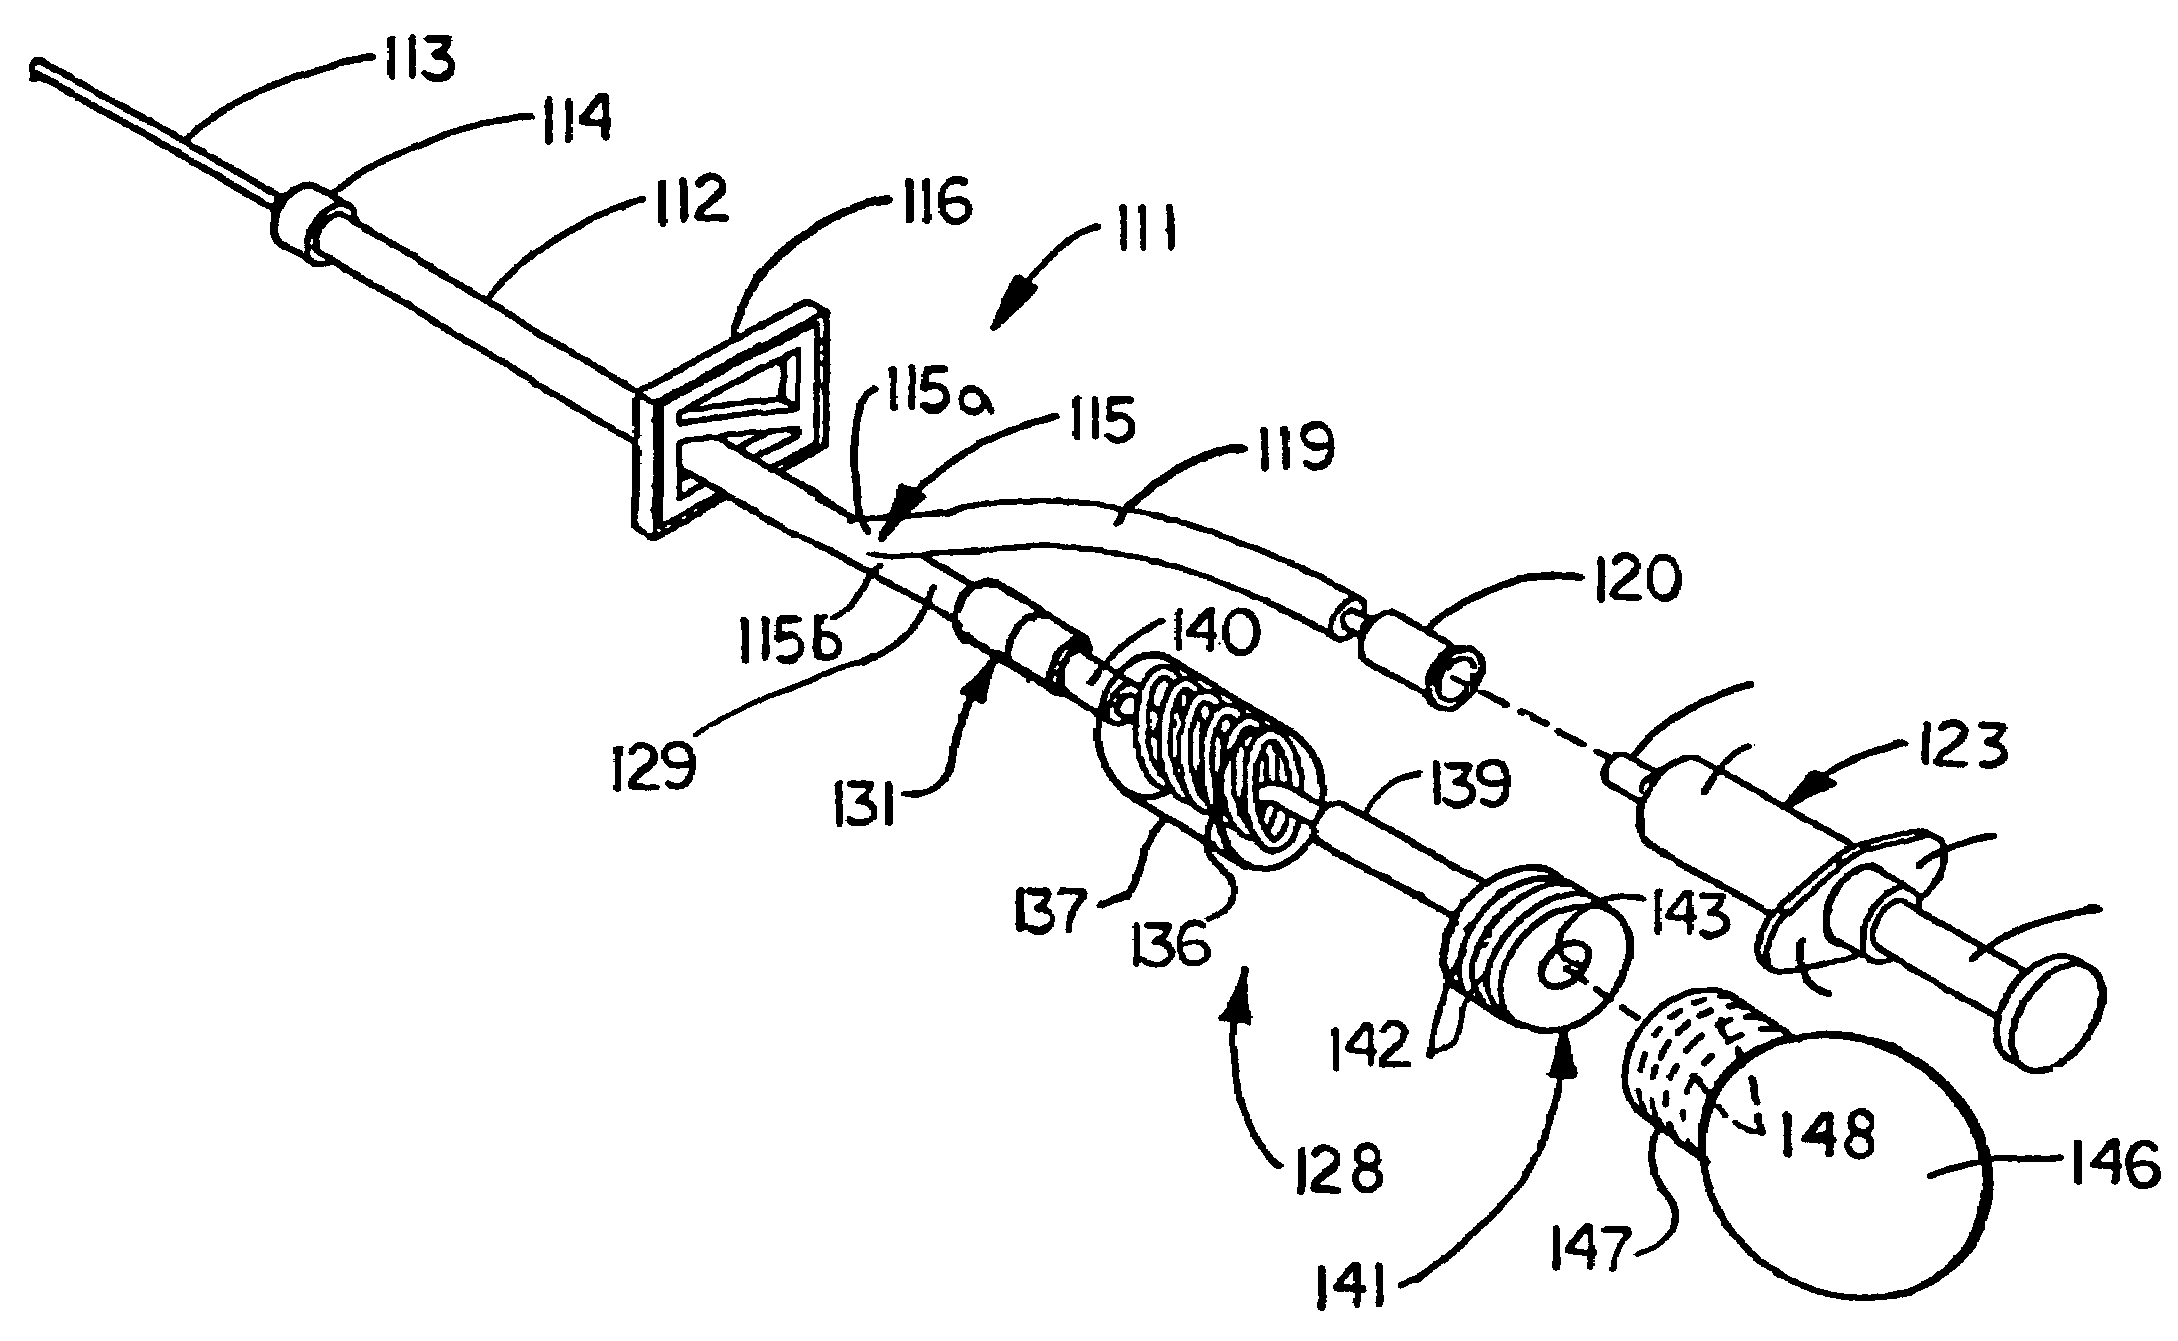 Devices for collecting blood and administering medical fluids